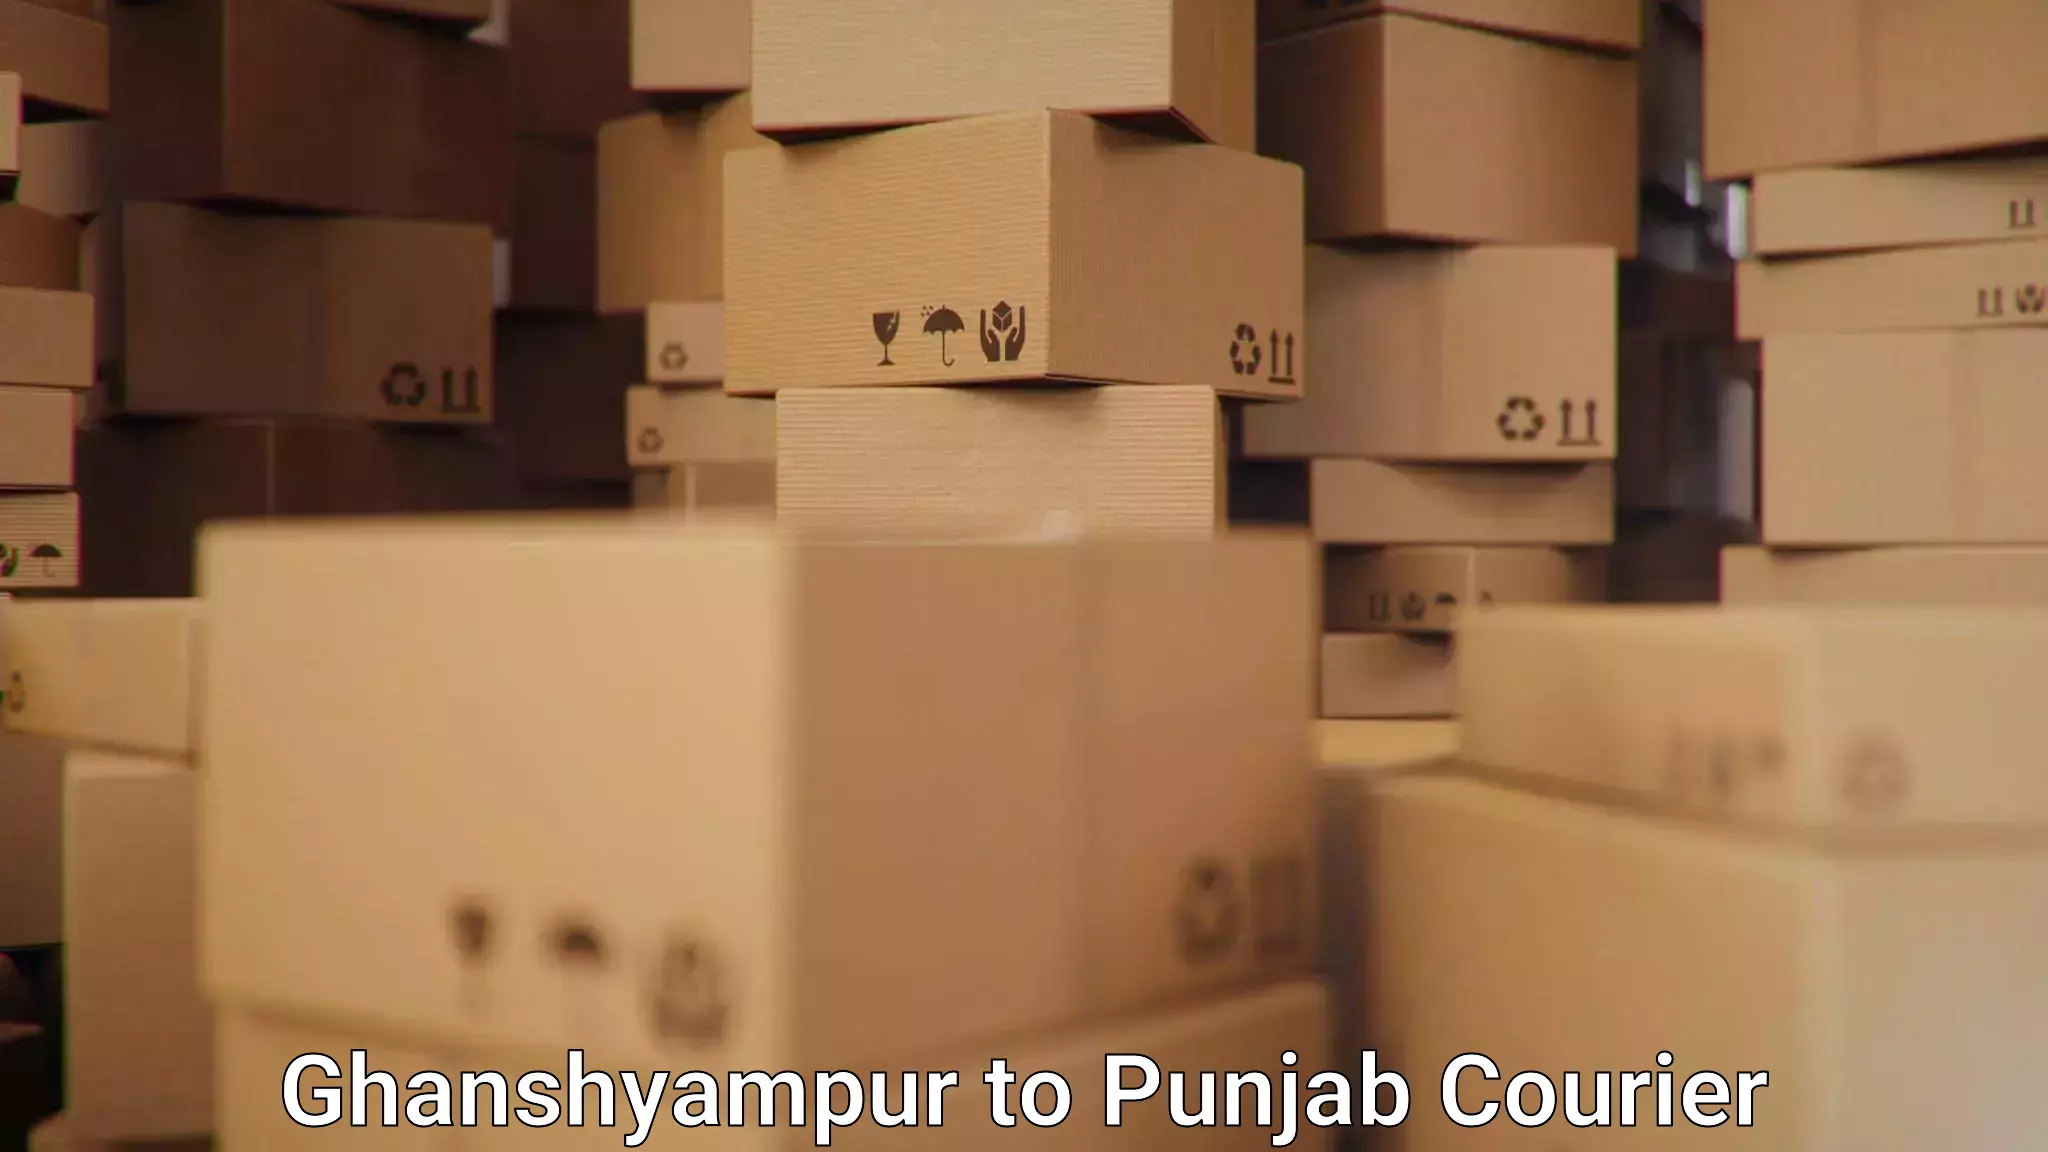 Advanced shipping services Ghanshyampur to Punjab